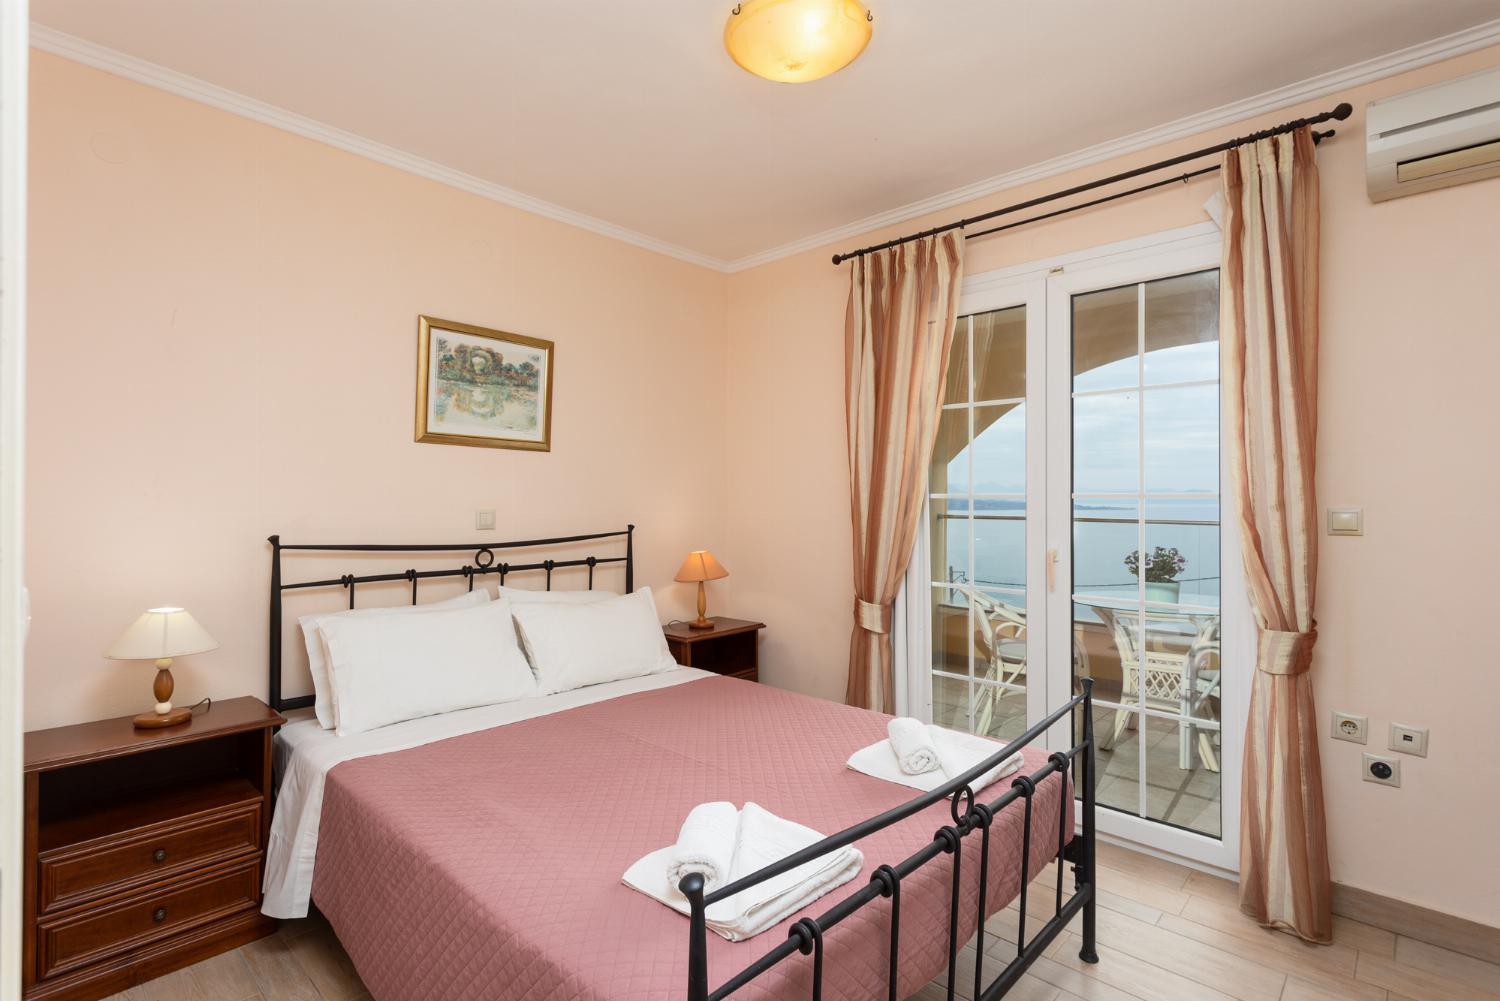 Double bedroom on ground floor with A/C, sea views, and terrace access